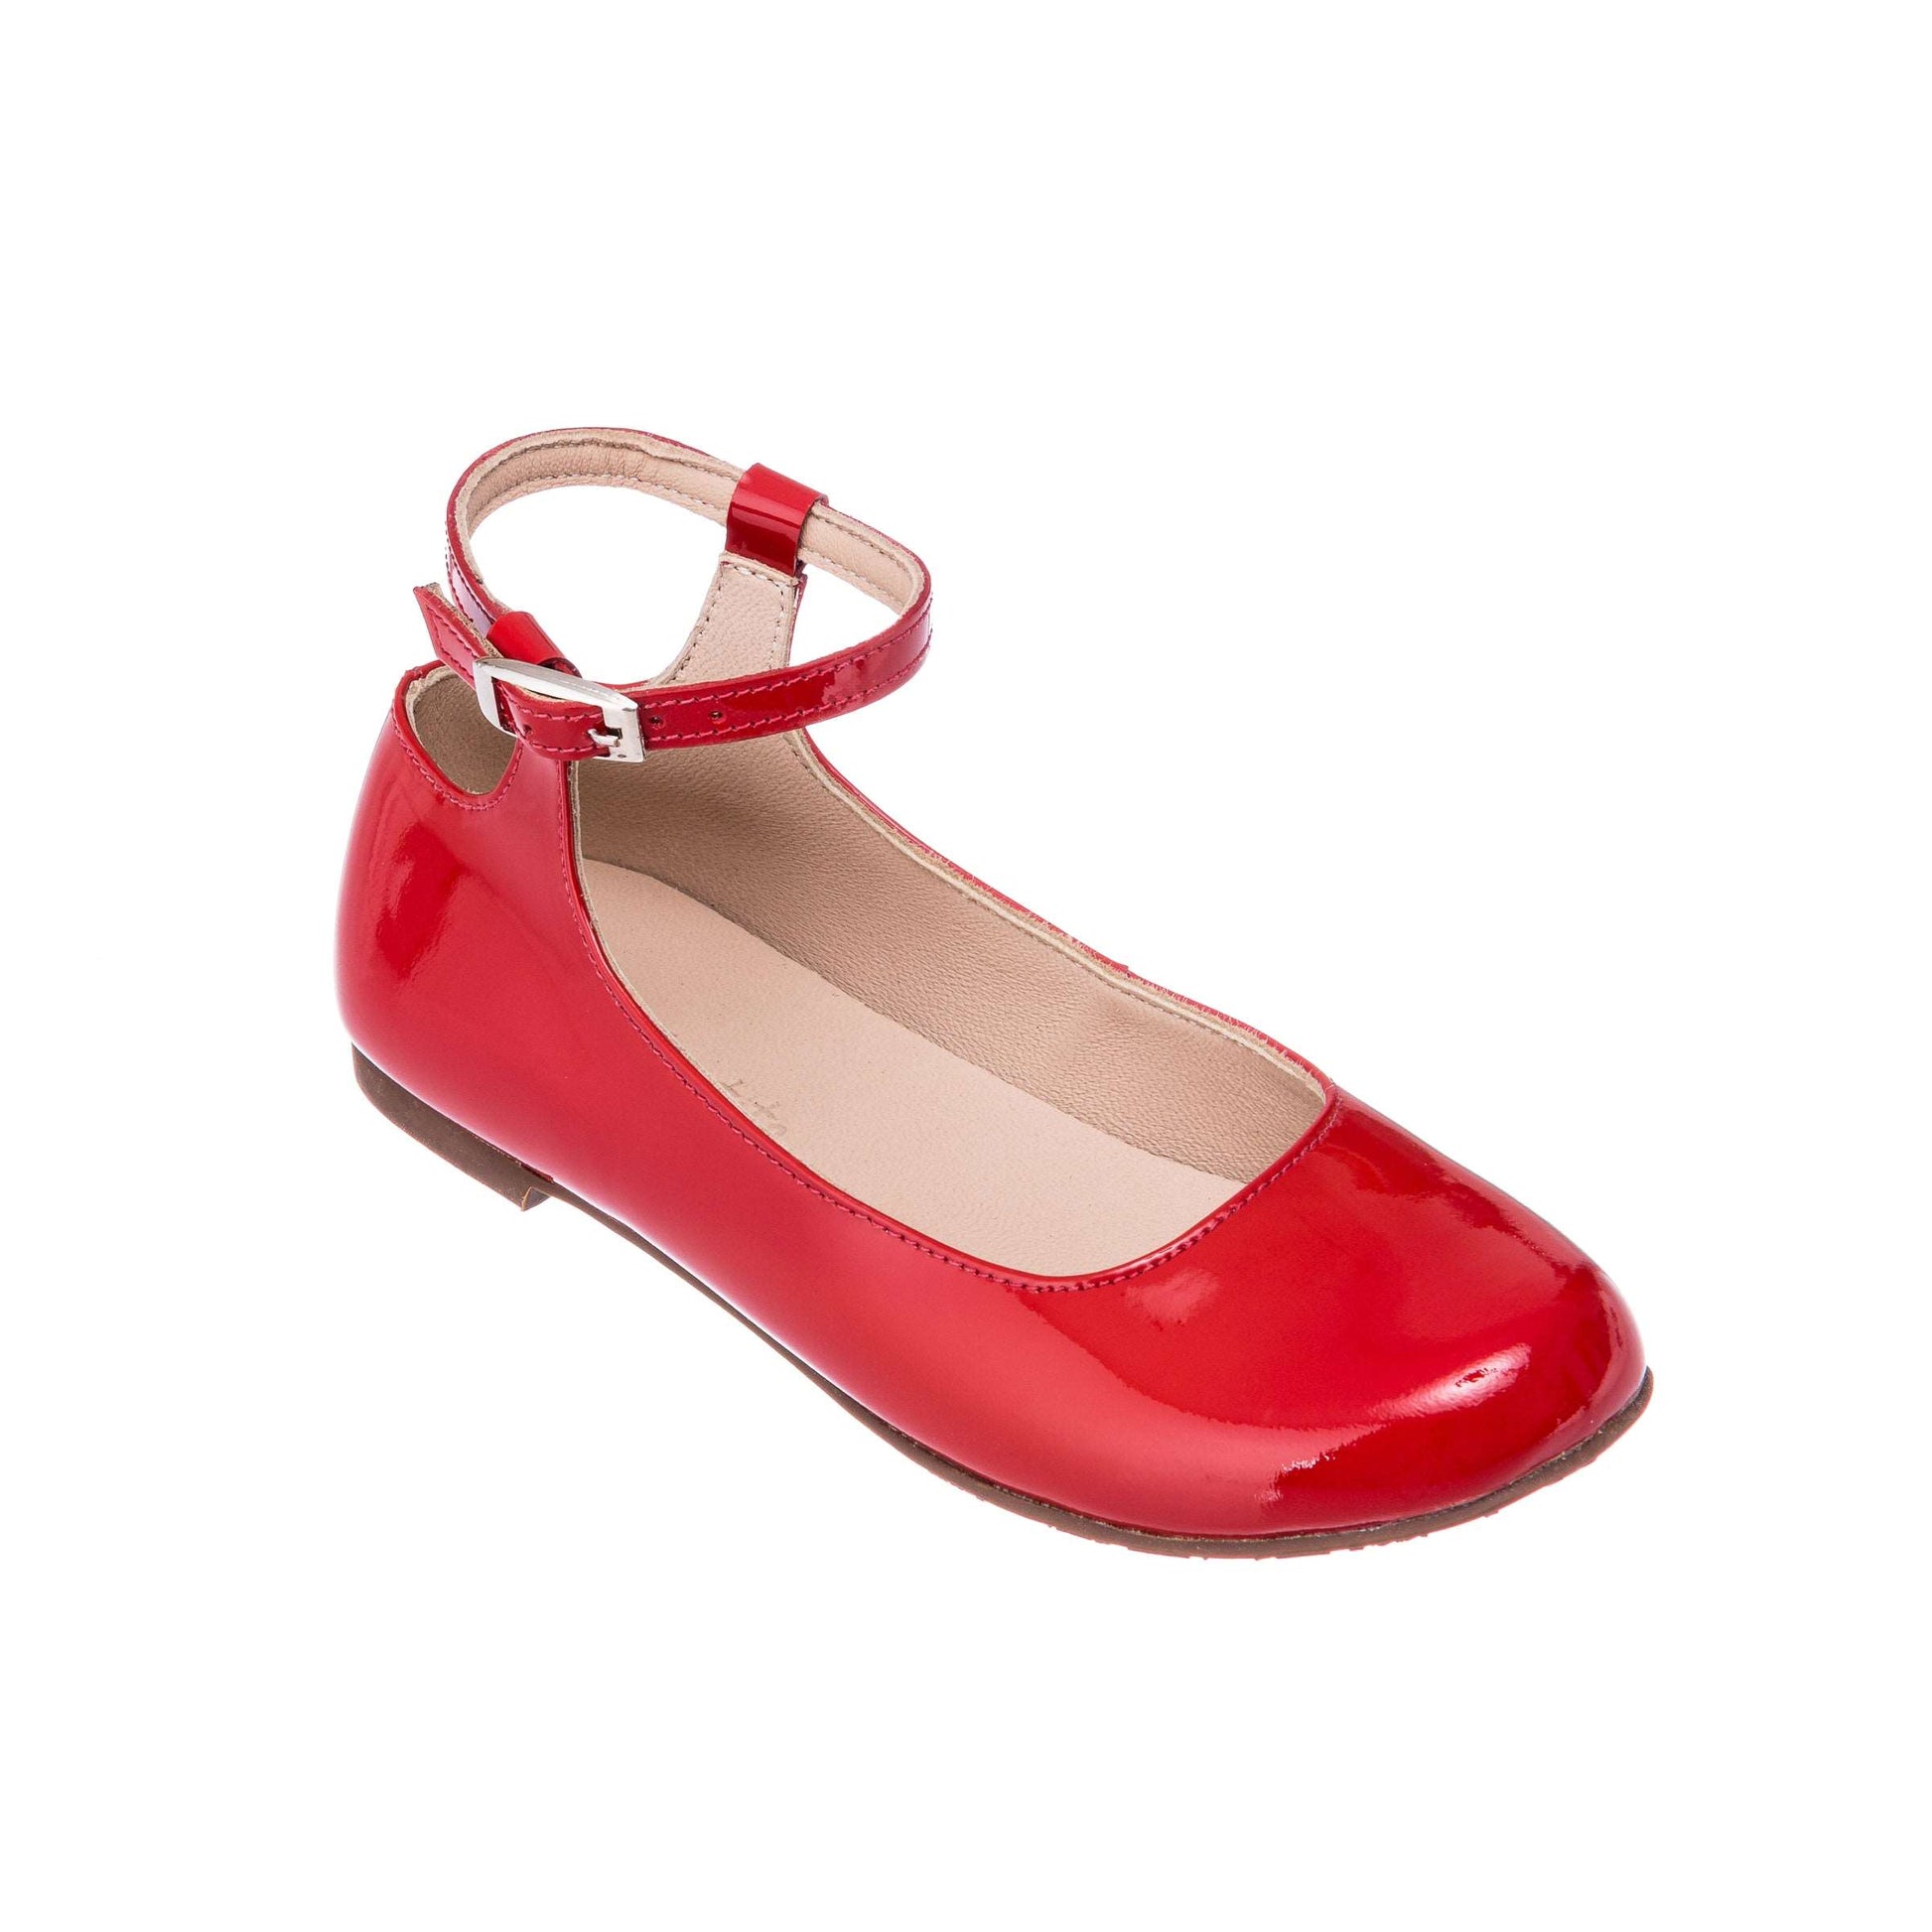 Celina Flats Patent Red